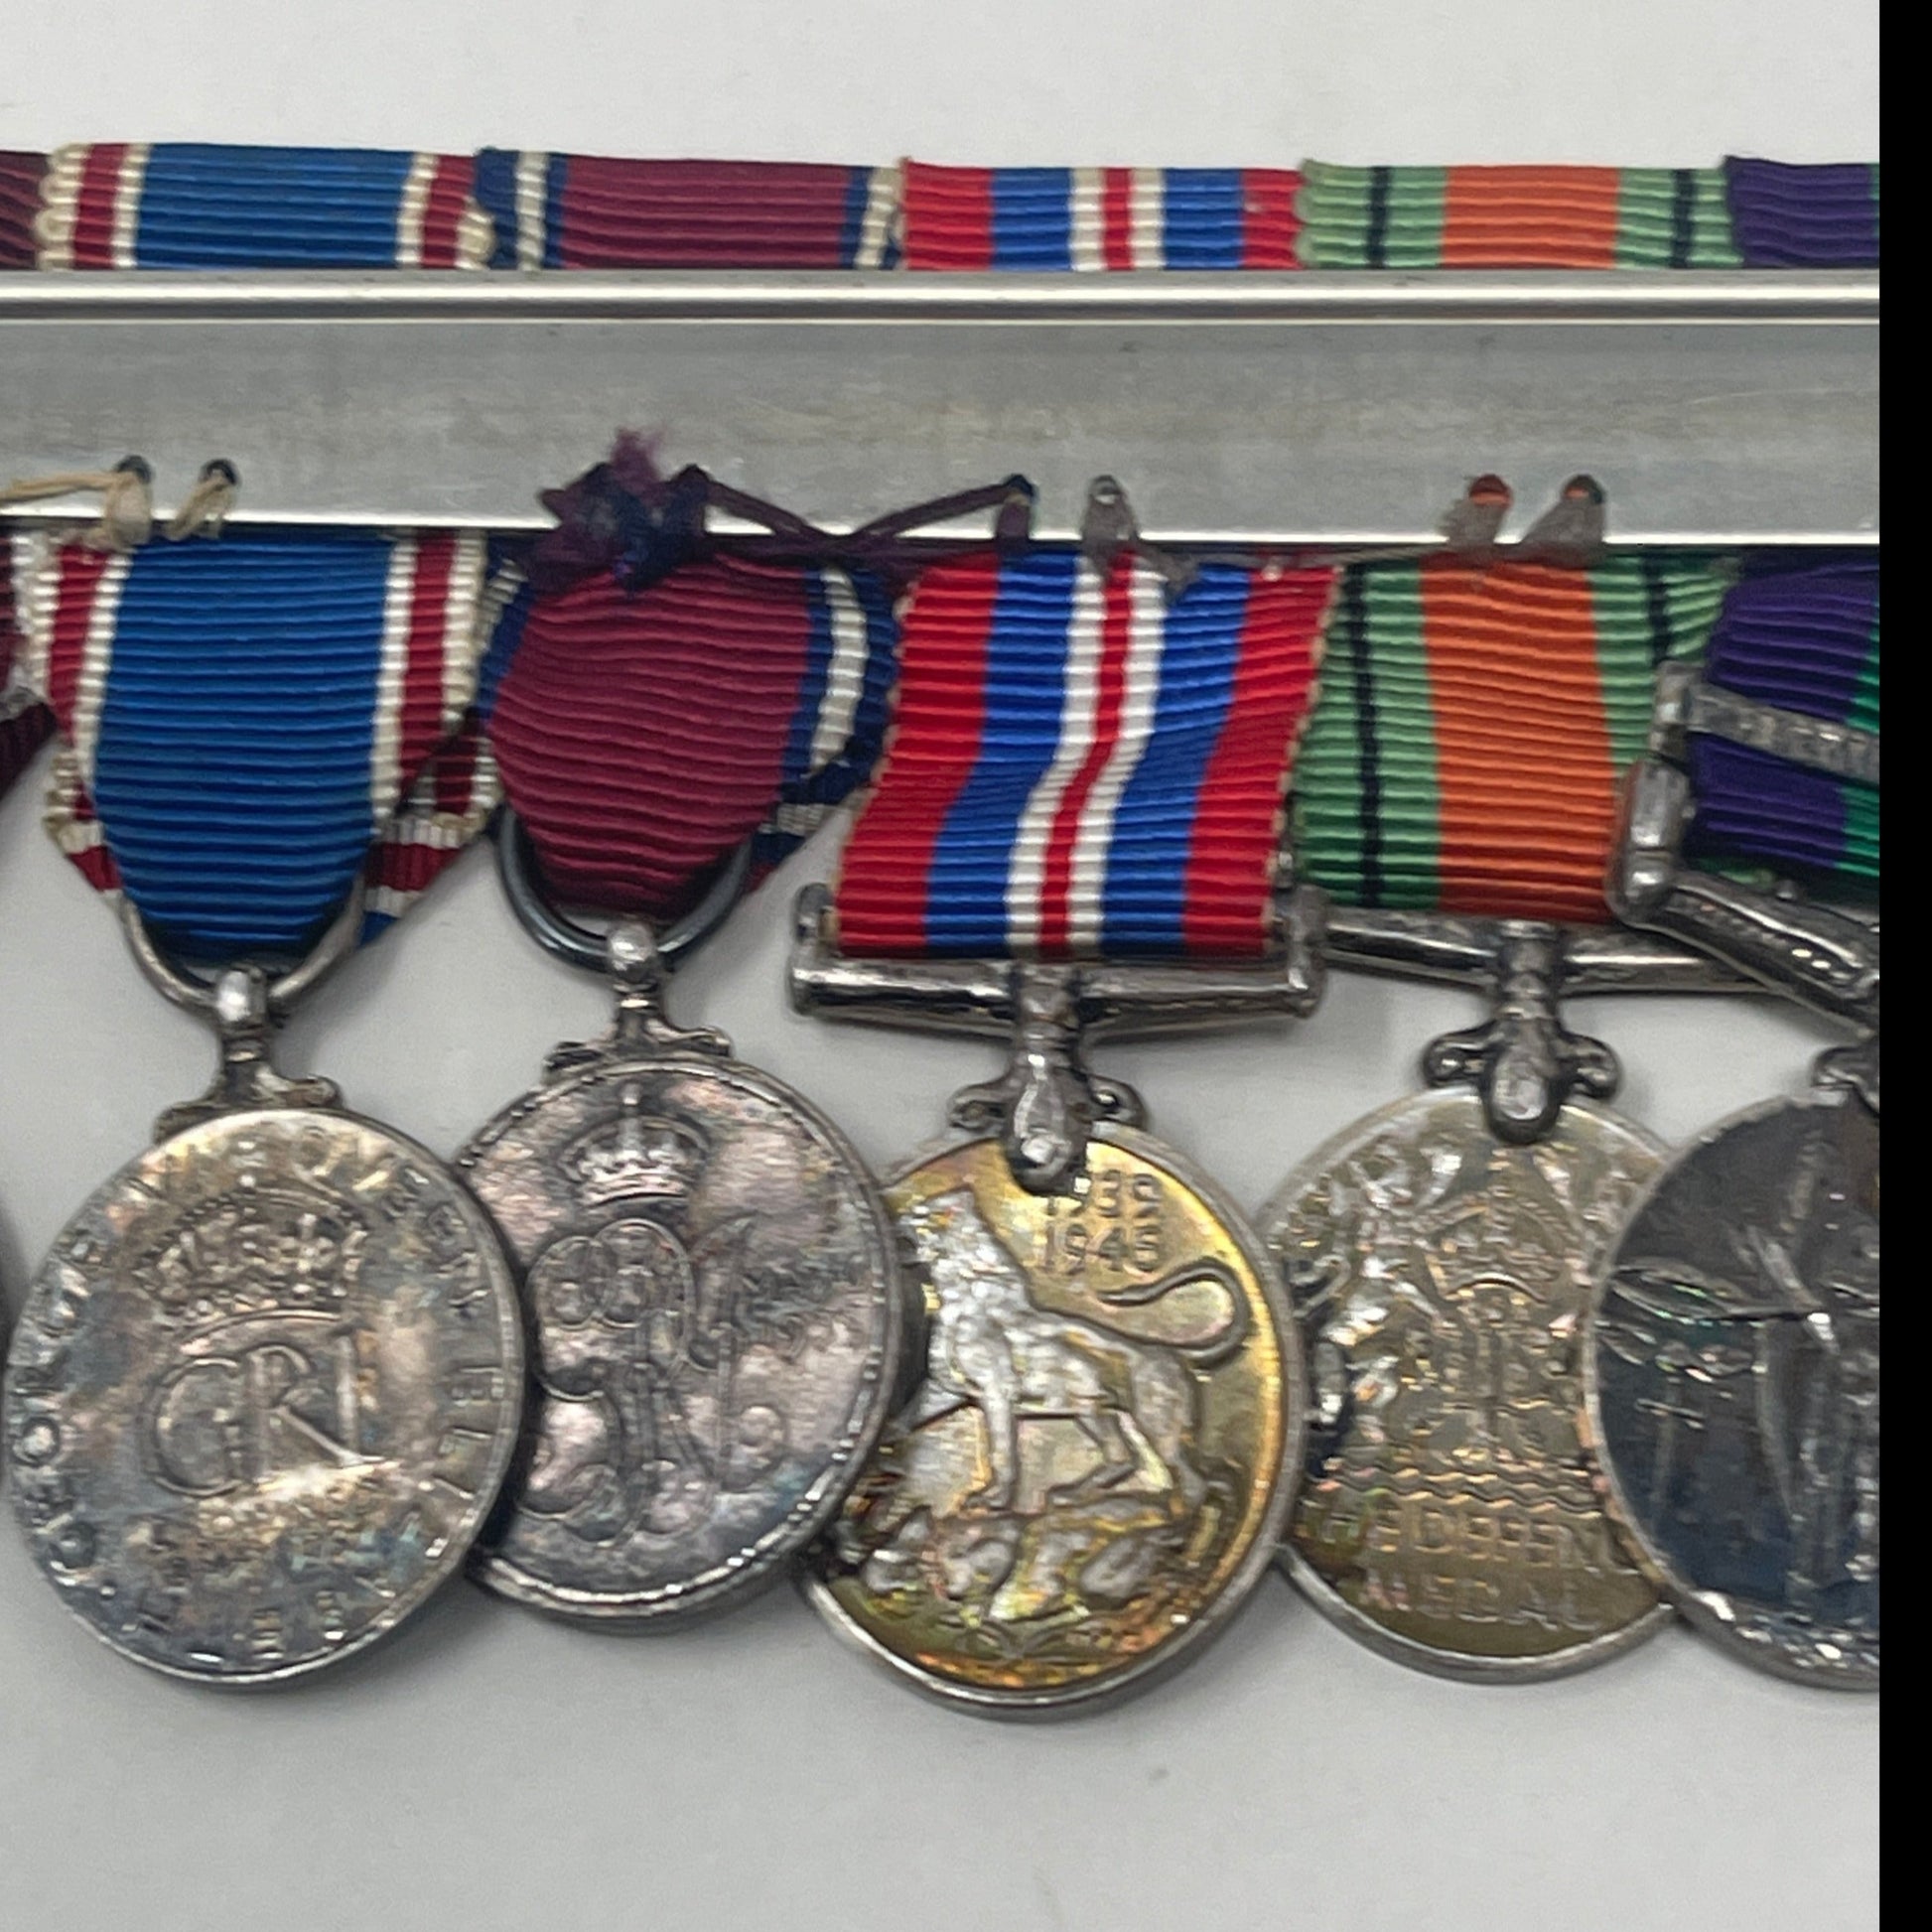 British Military World War I and later Eleven Medal Miniature Medal Dress Group